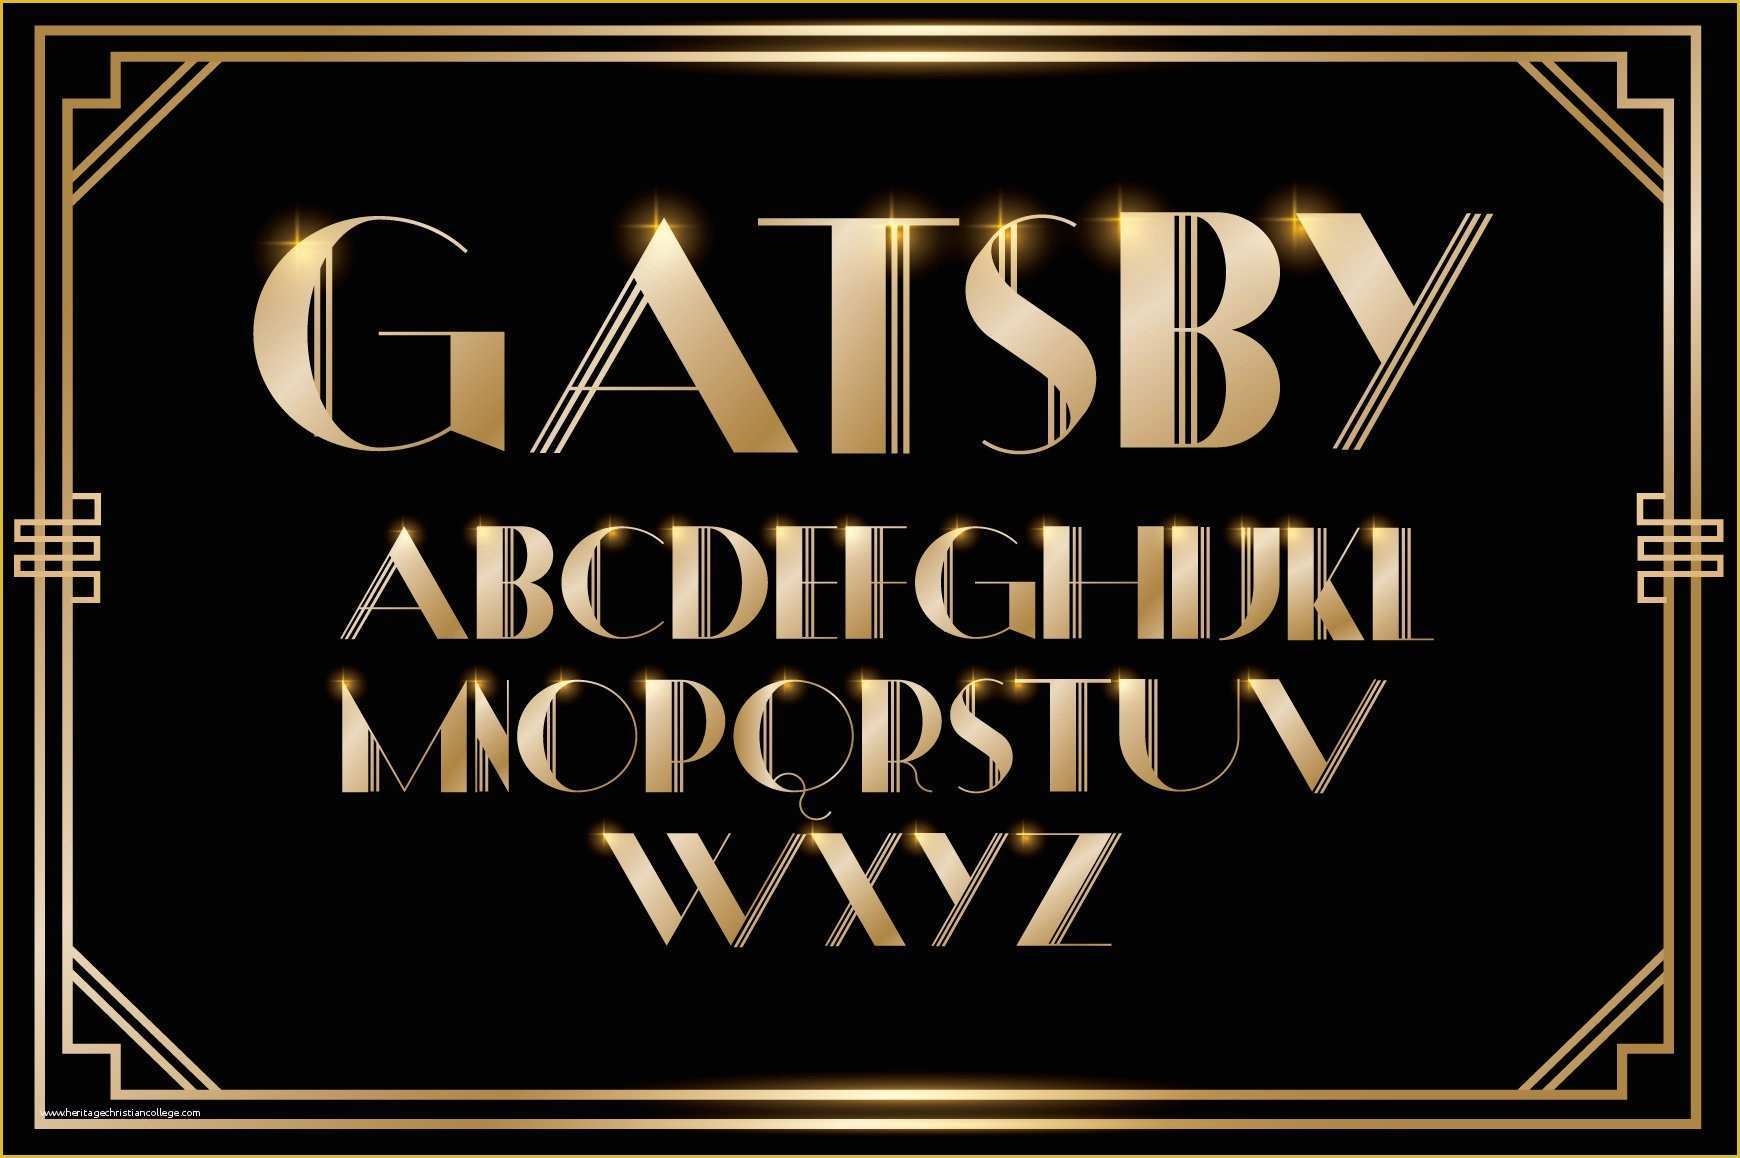 Great Gatsby Invitation Template Free Download Of Gatsby Typography Vector Graphic Objects Creative Market